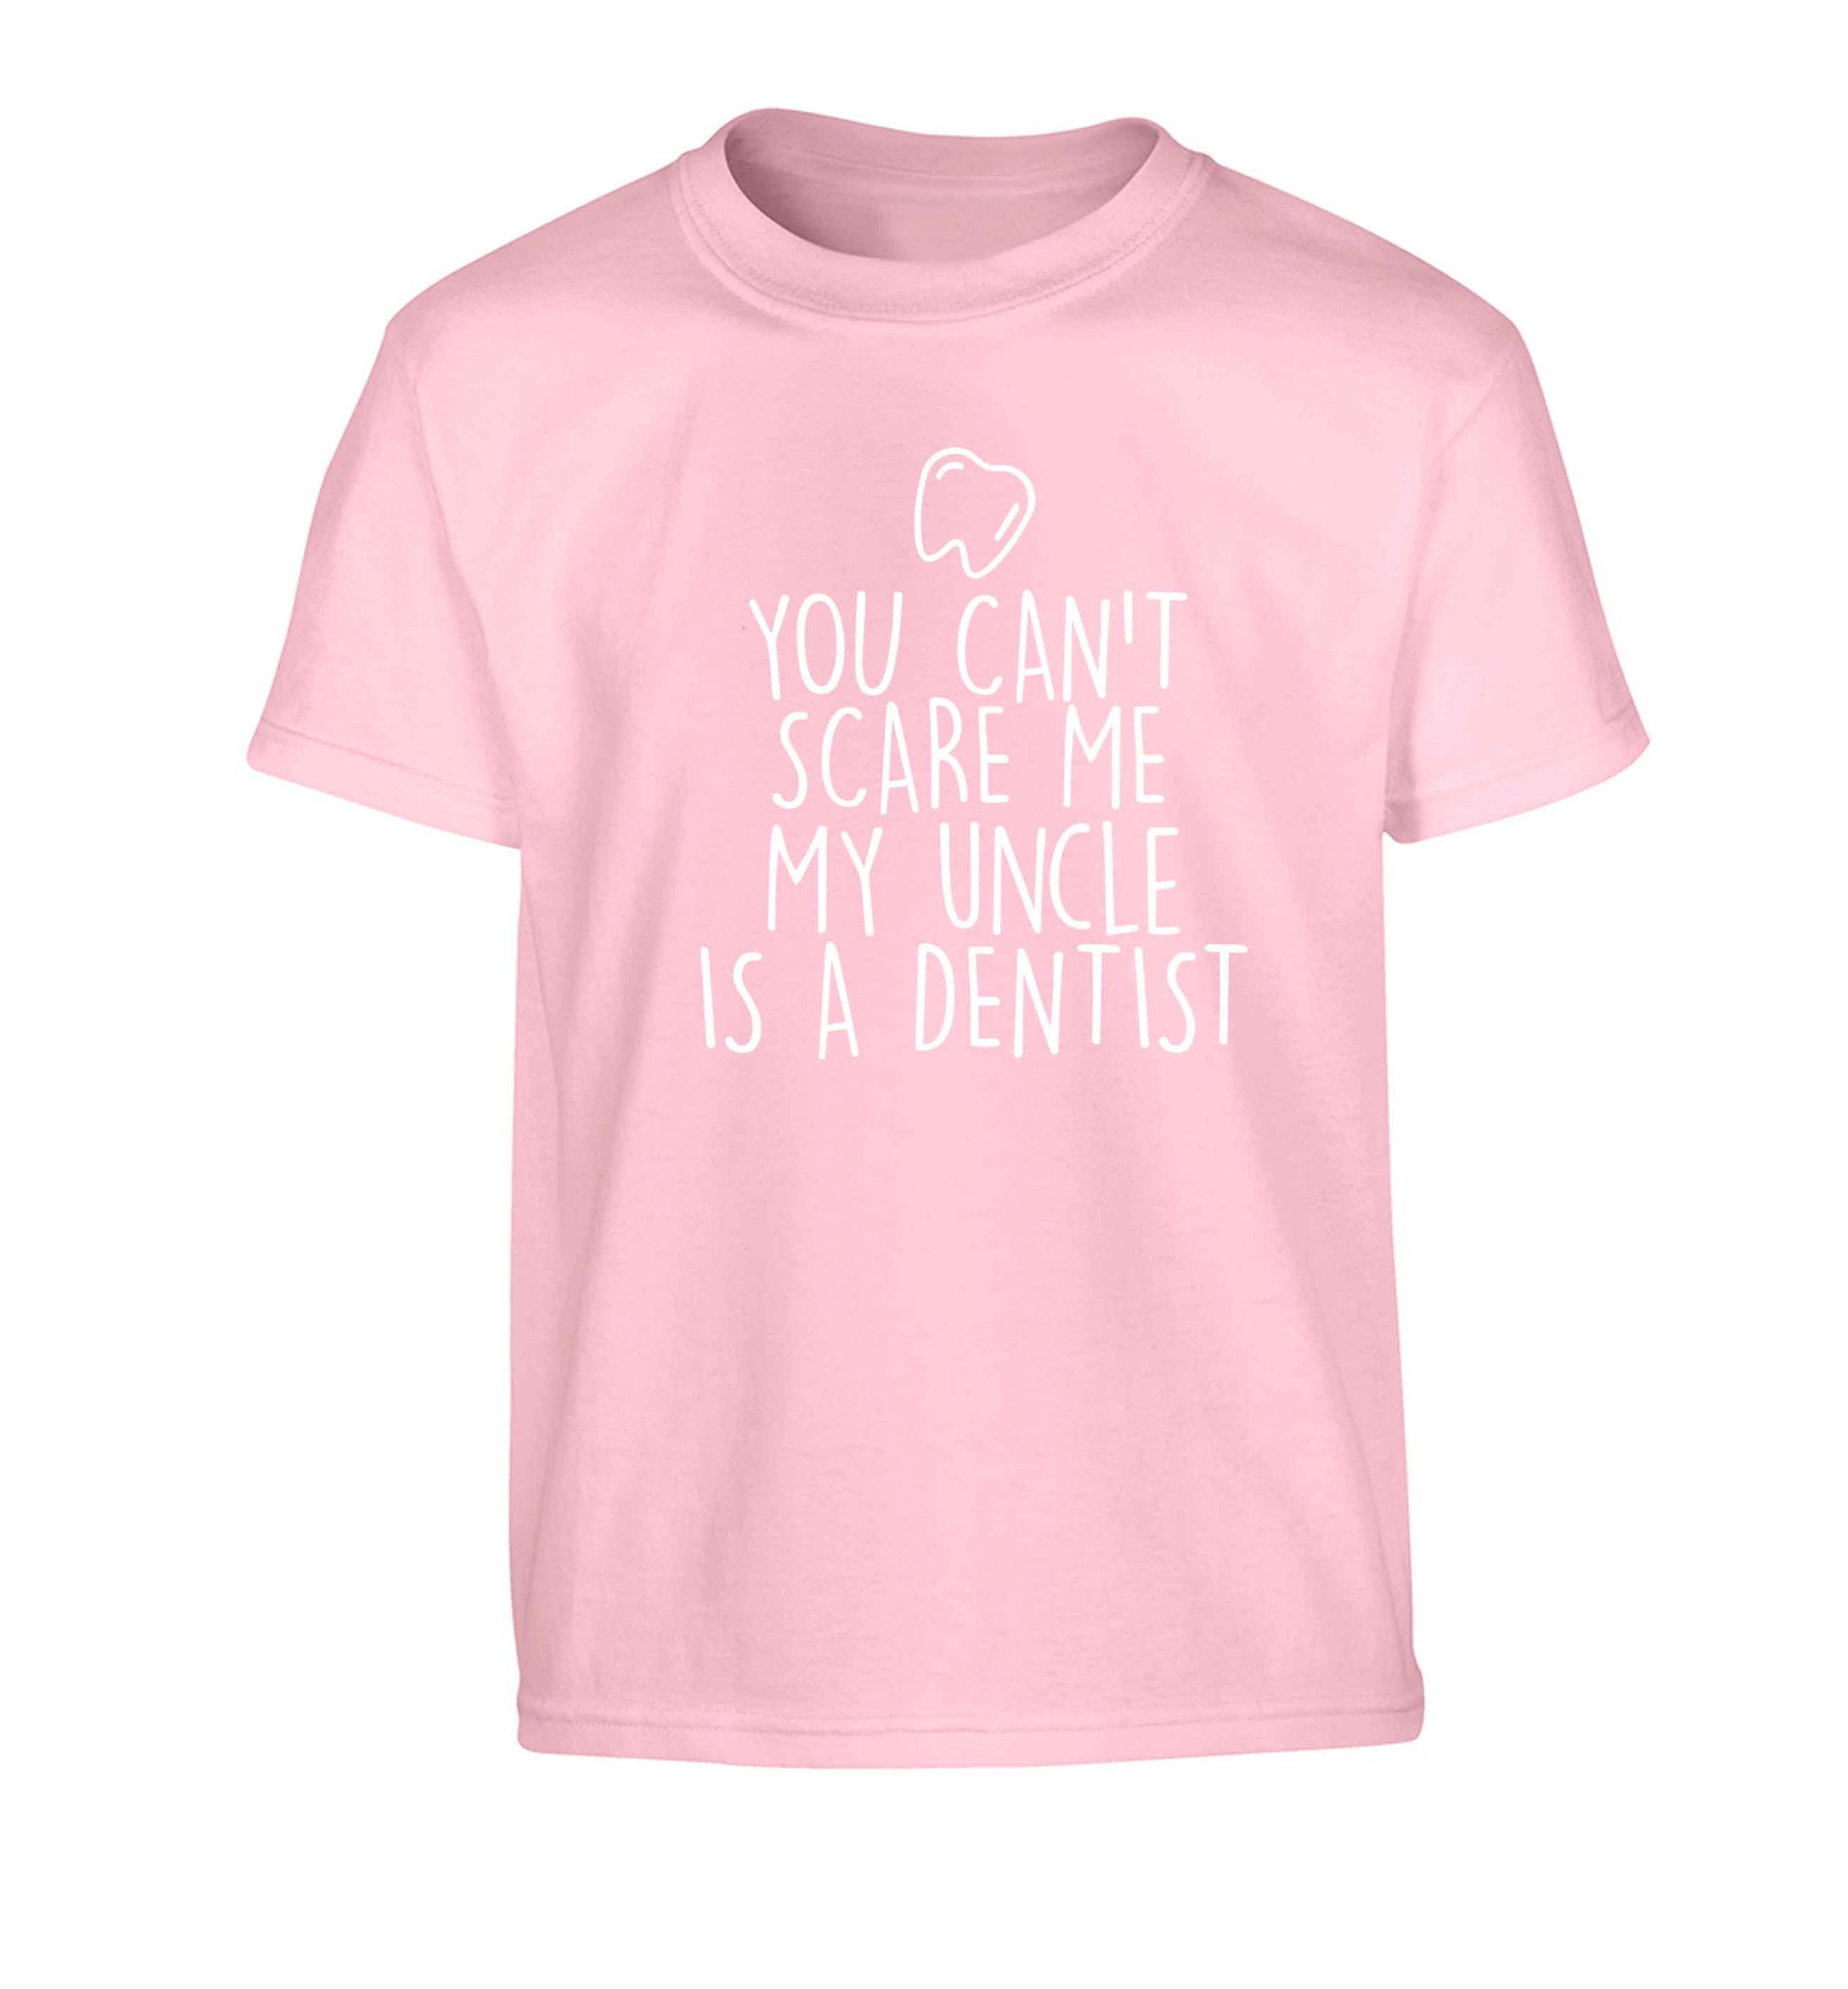 You can't scare me my uncle is a dentist Children's light pink Tshirt 12-13 Years